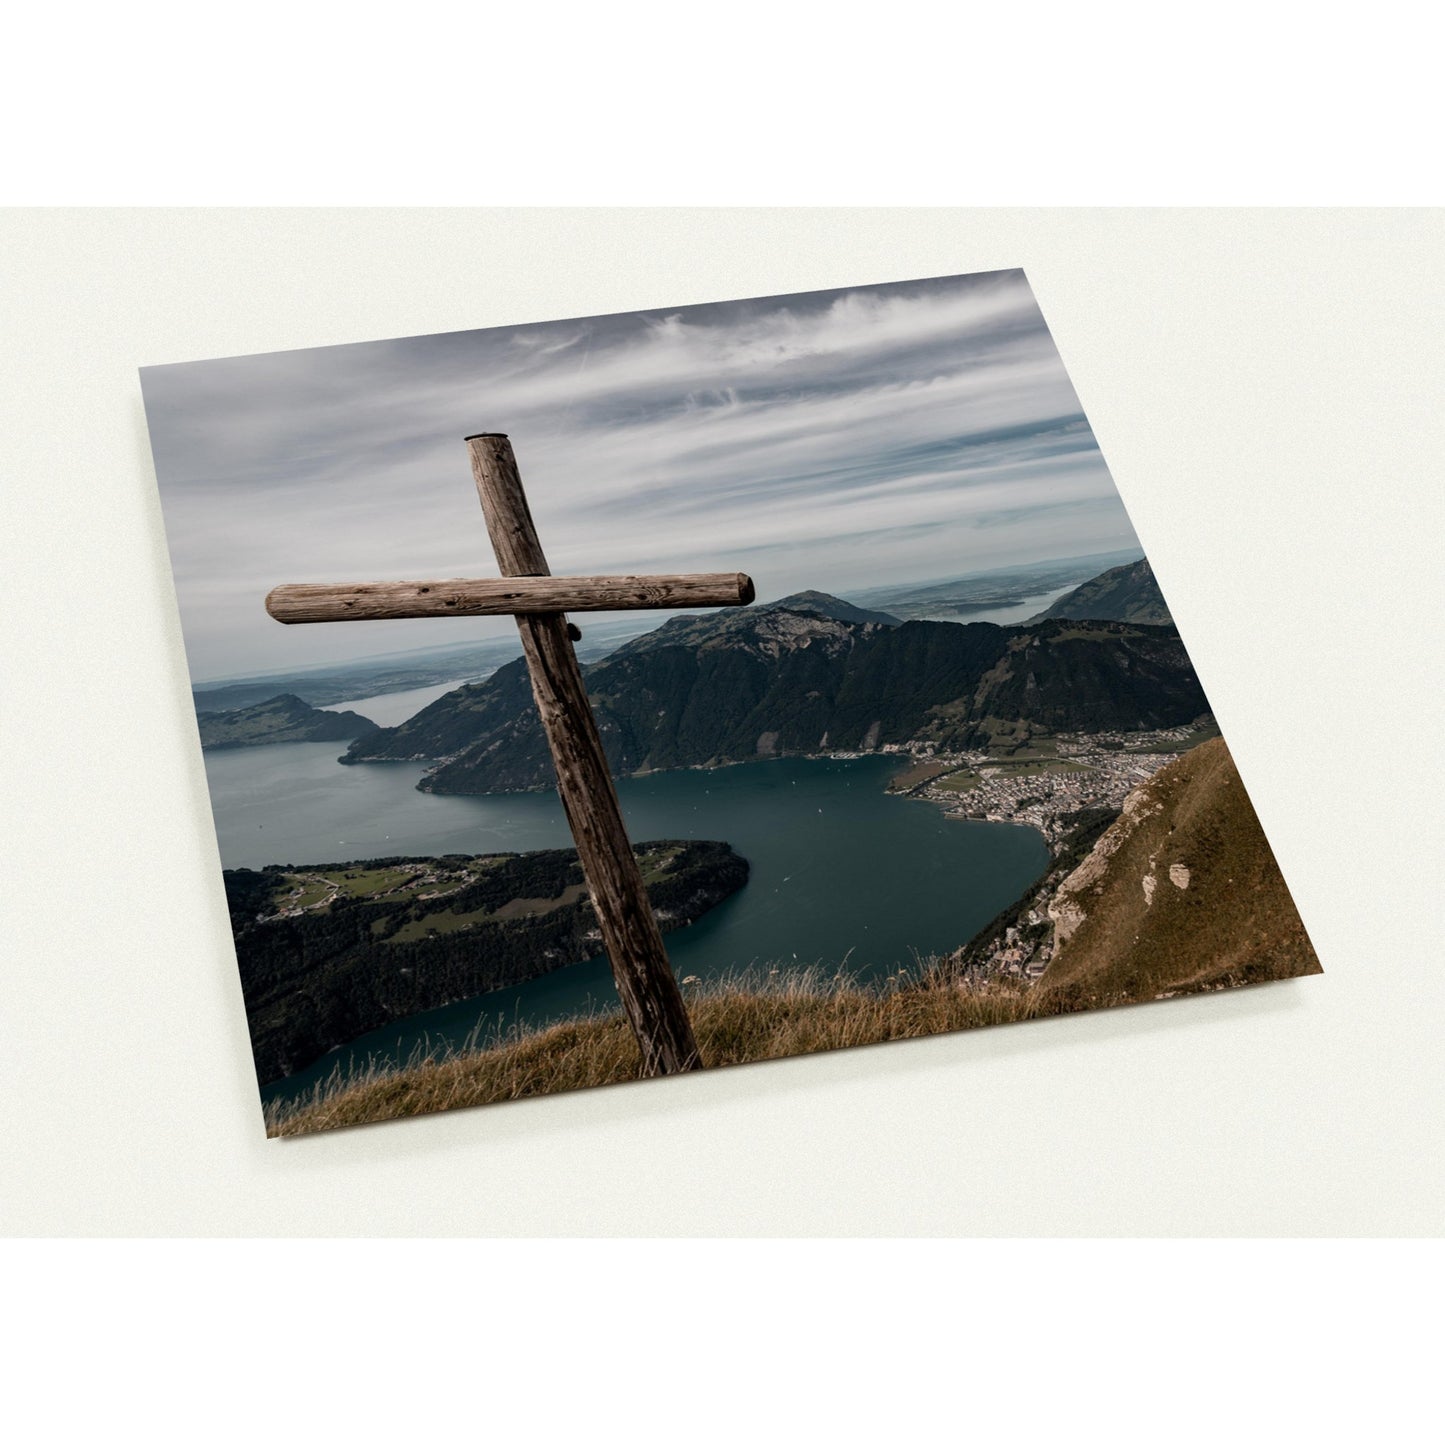 Breathtaking view from Fronalpstock greeting card set with 10 cards (2-sided, with envelopes)